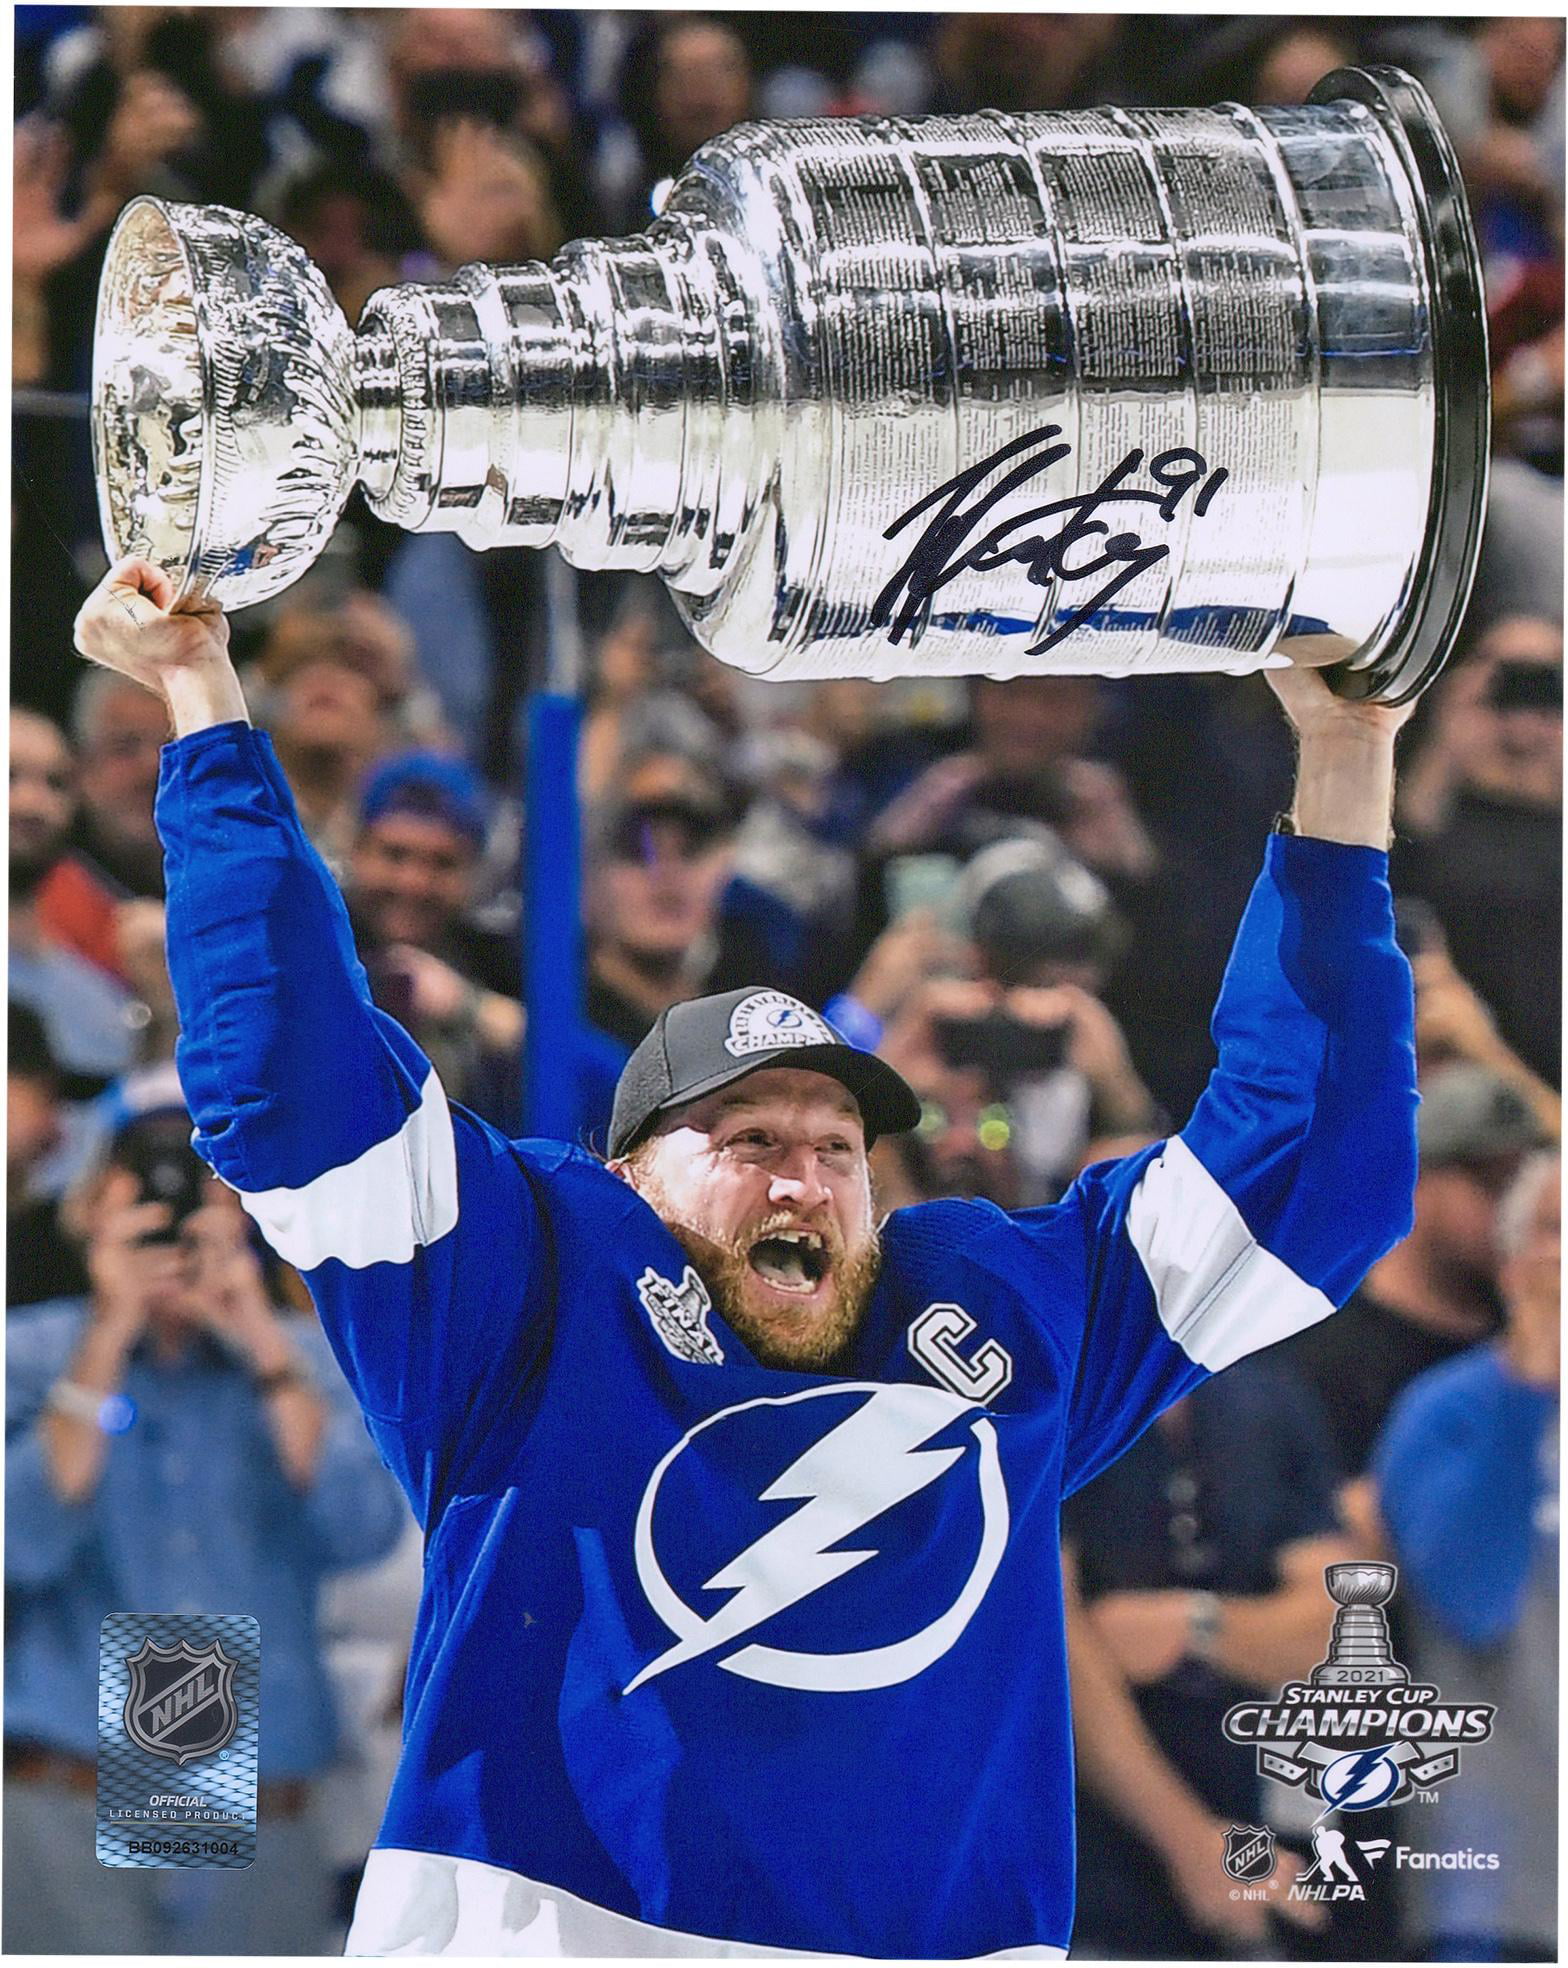 Fanatics Authentic Certified Steven Stamkos Tampa Bay Lightning Autographed 8 x 10 White Jersey Skating Photograph 